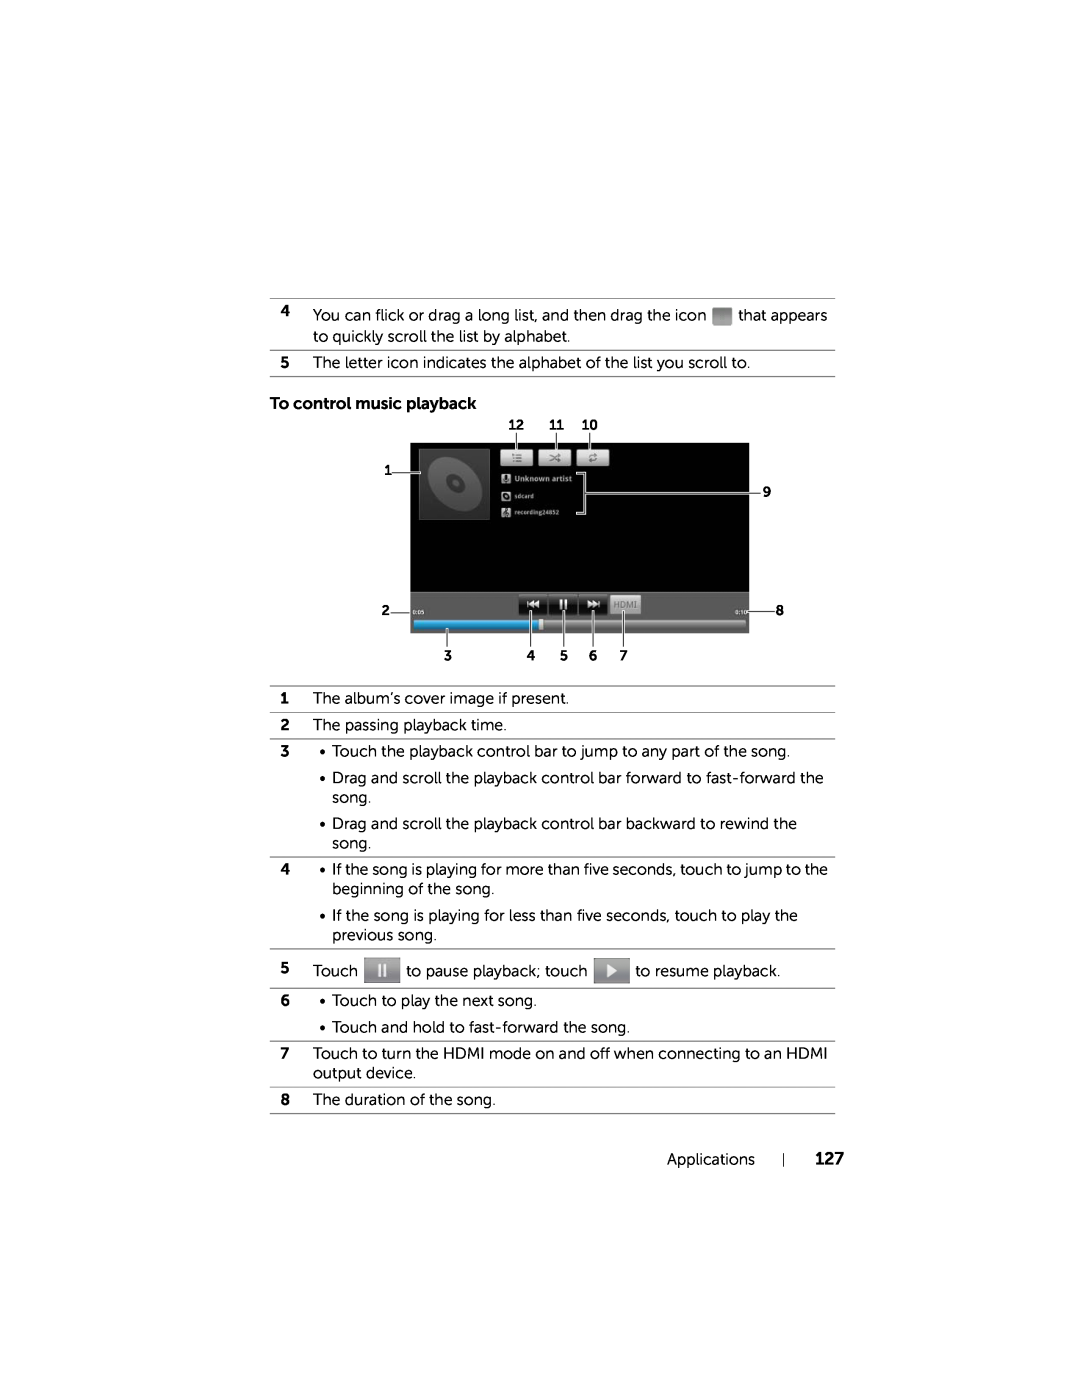 Dell 7 user manual To control music playback 